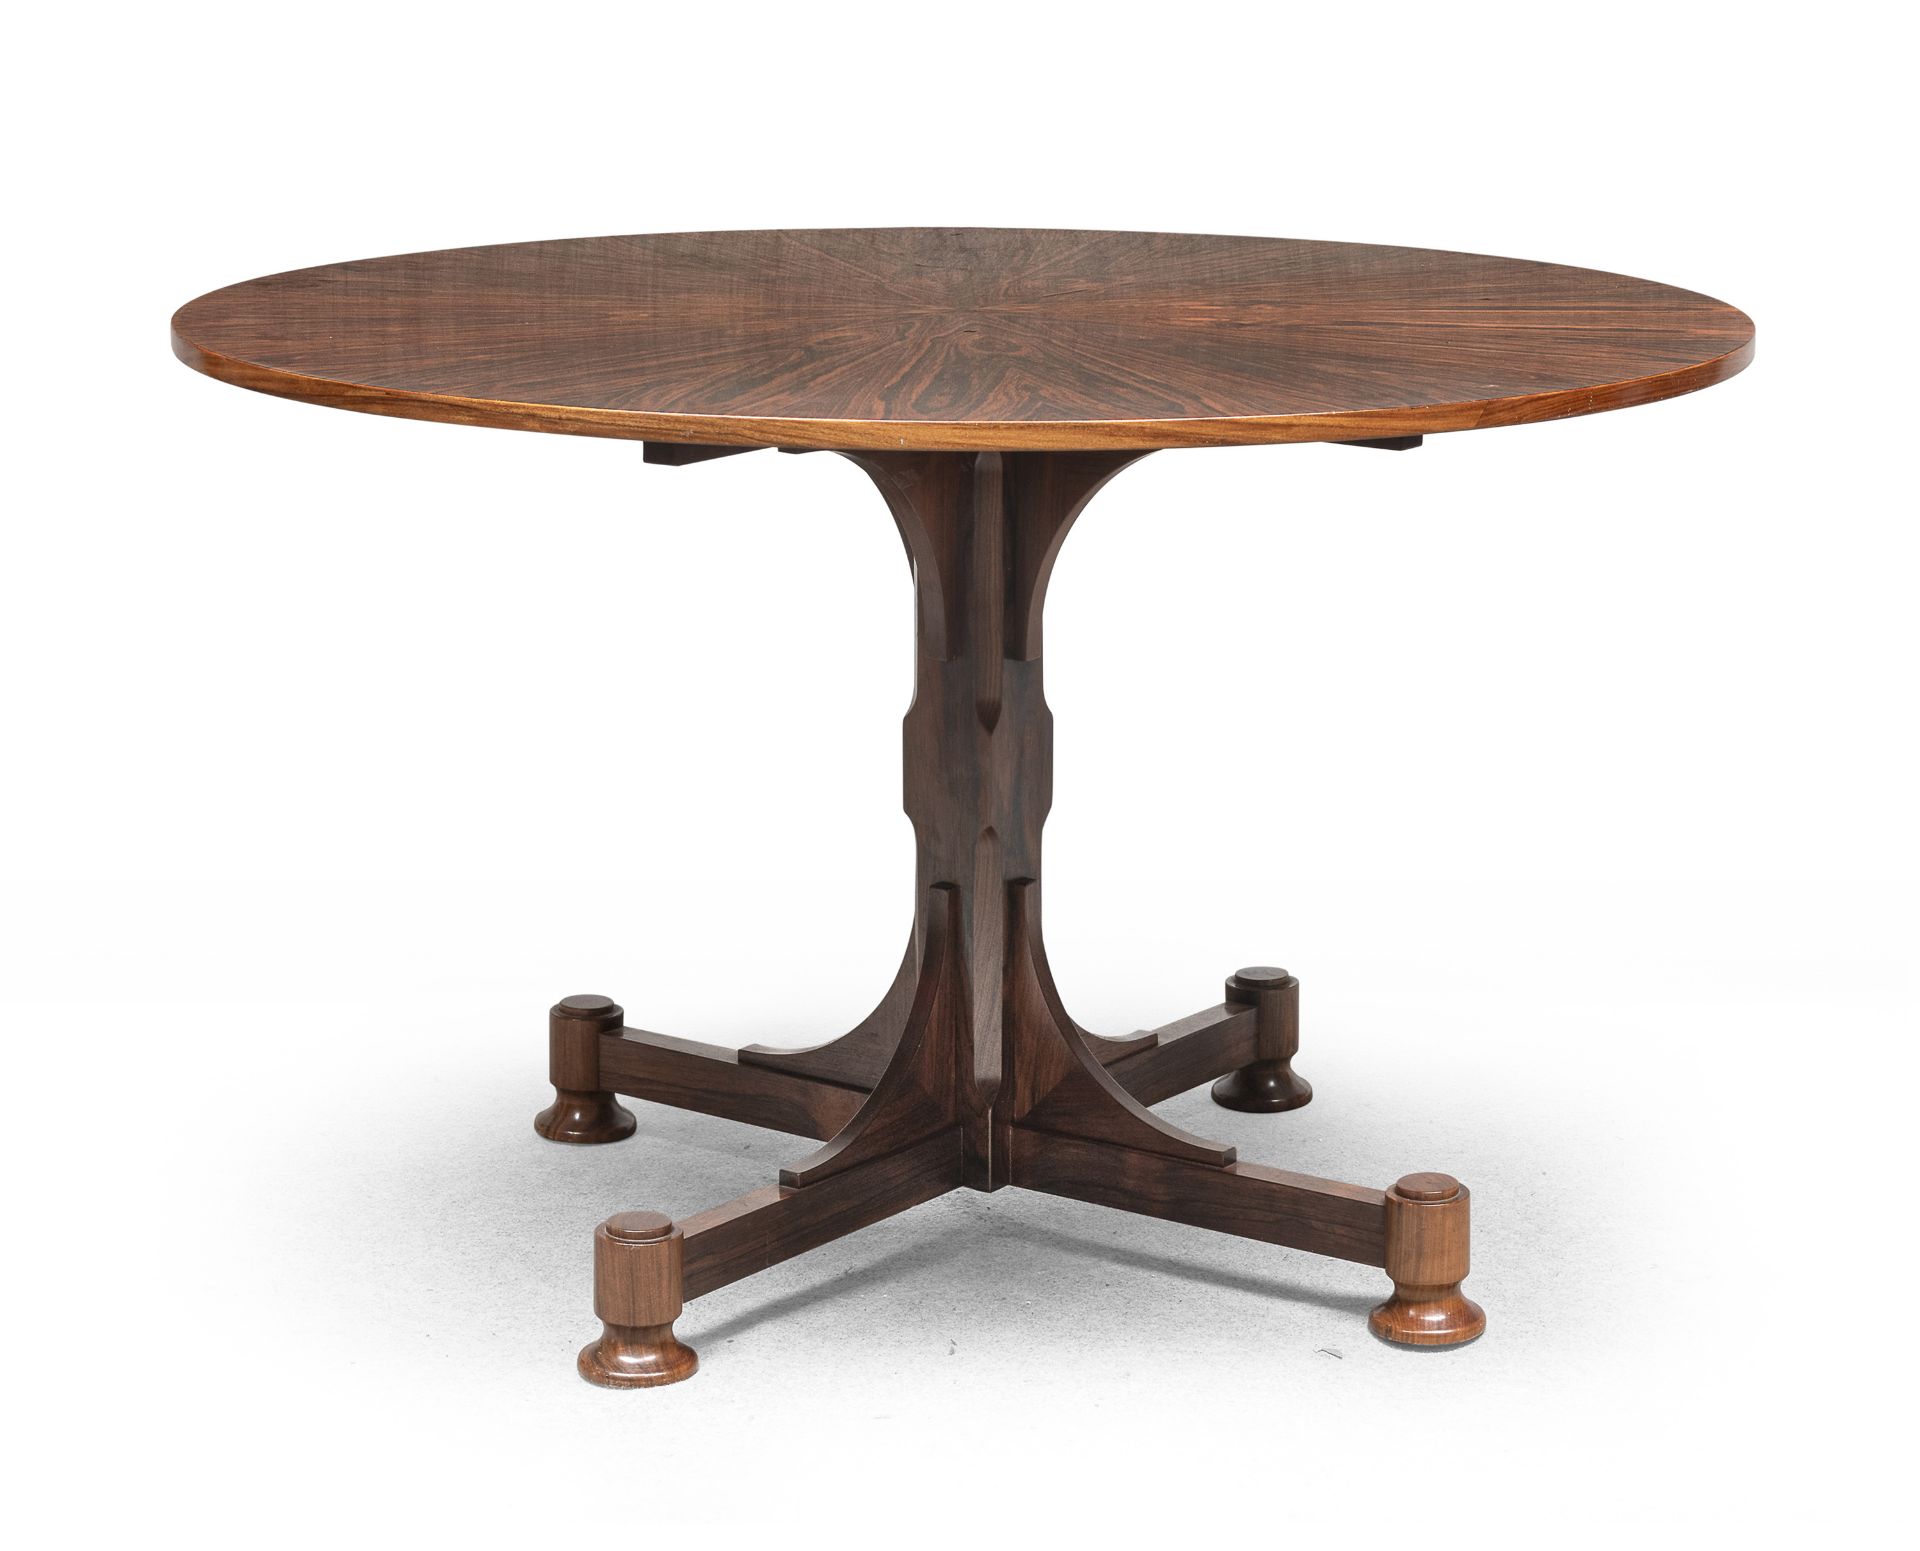 ROSEWOOD TABLE 1960s